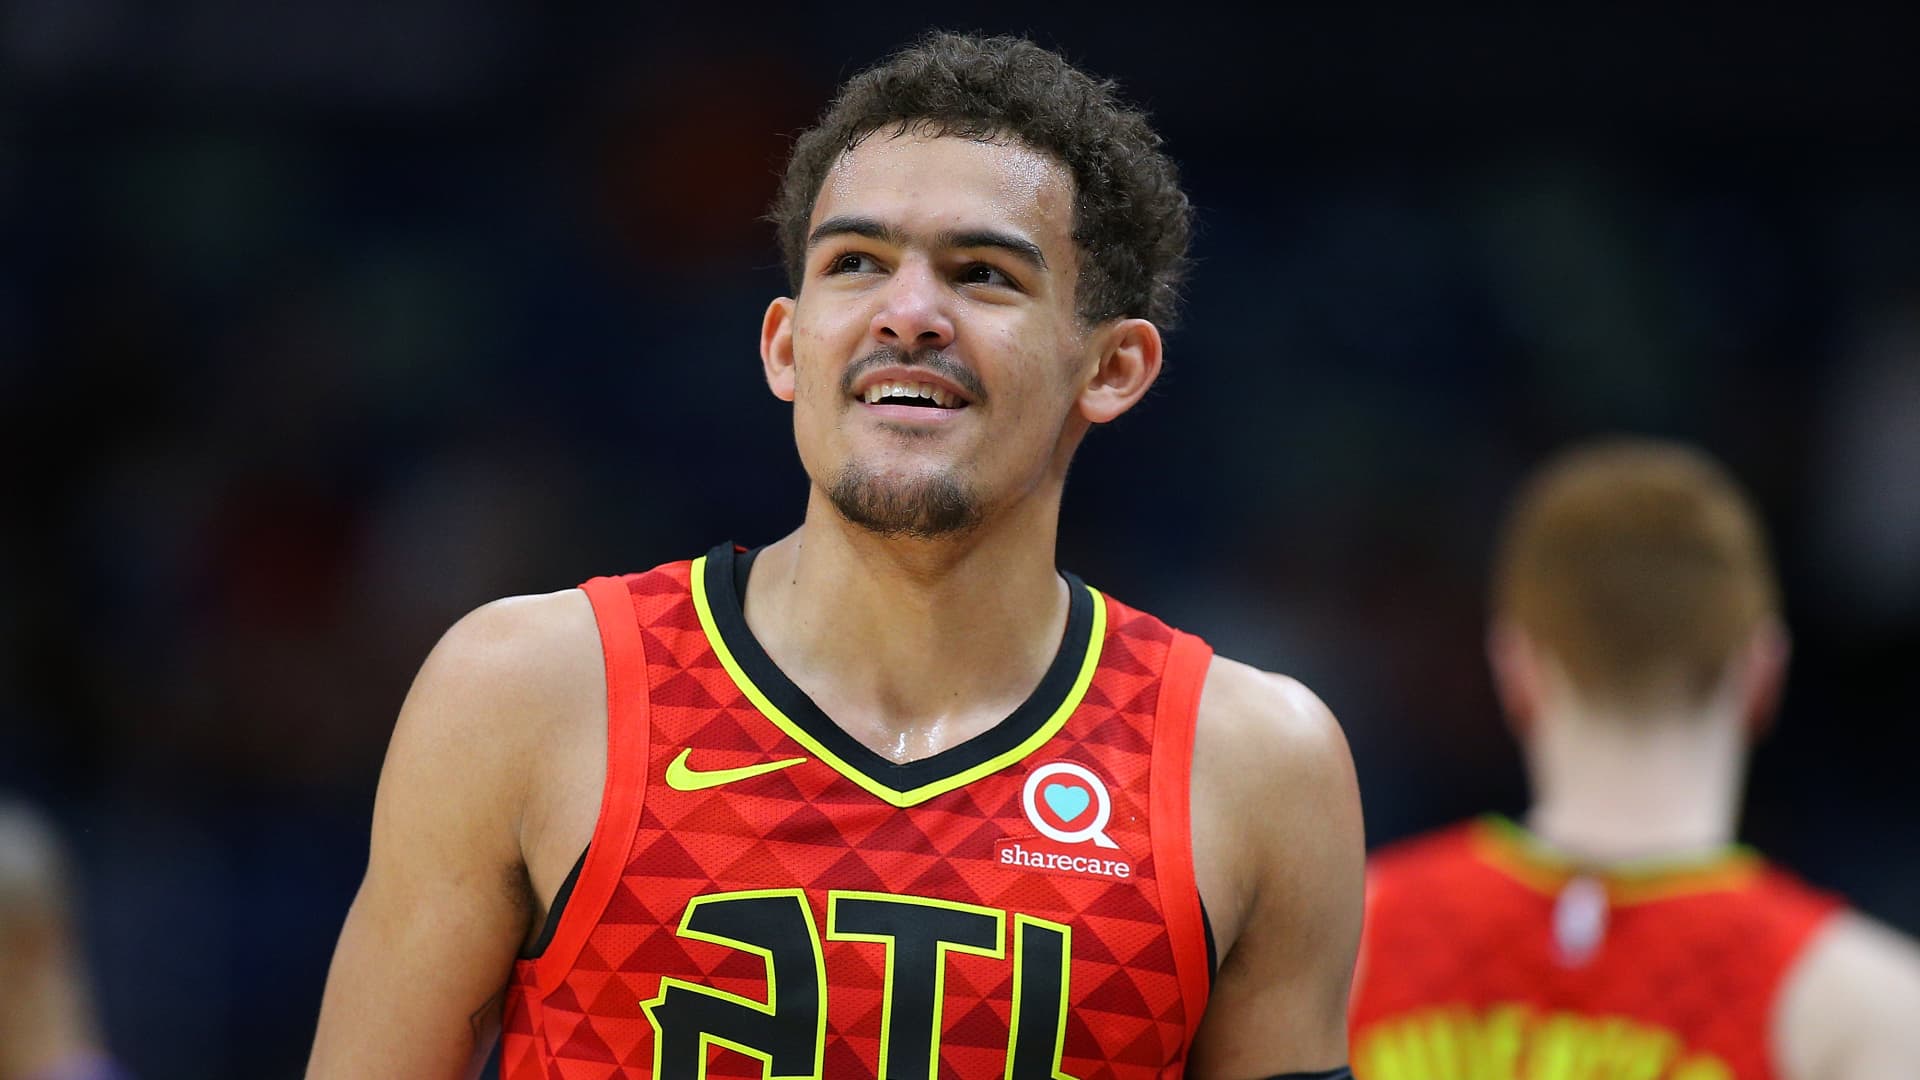 Sports Trae Young HD Wallpaper